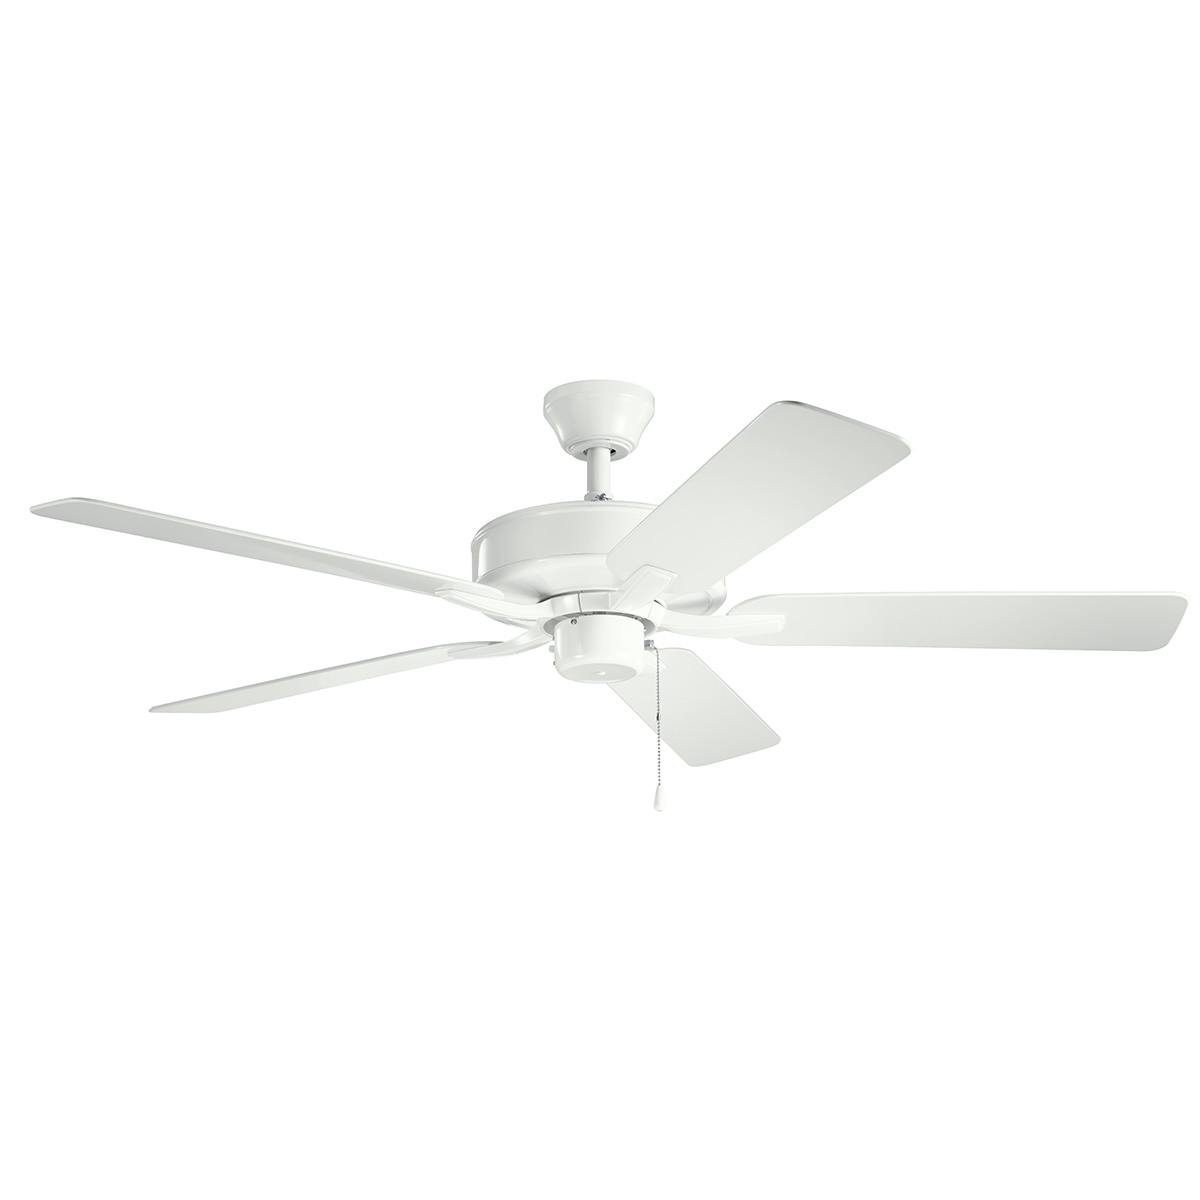 52" Basics Pro Patio Fan in White on a white background